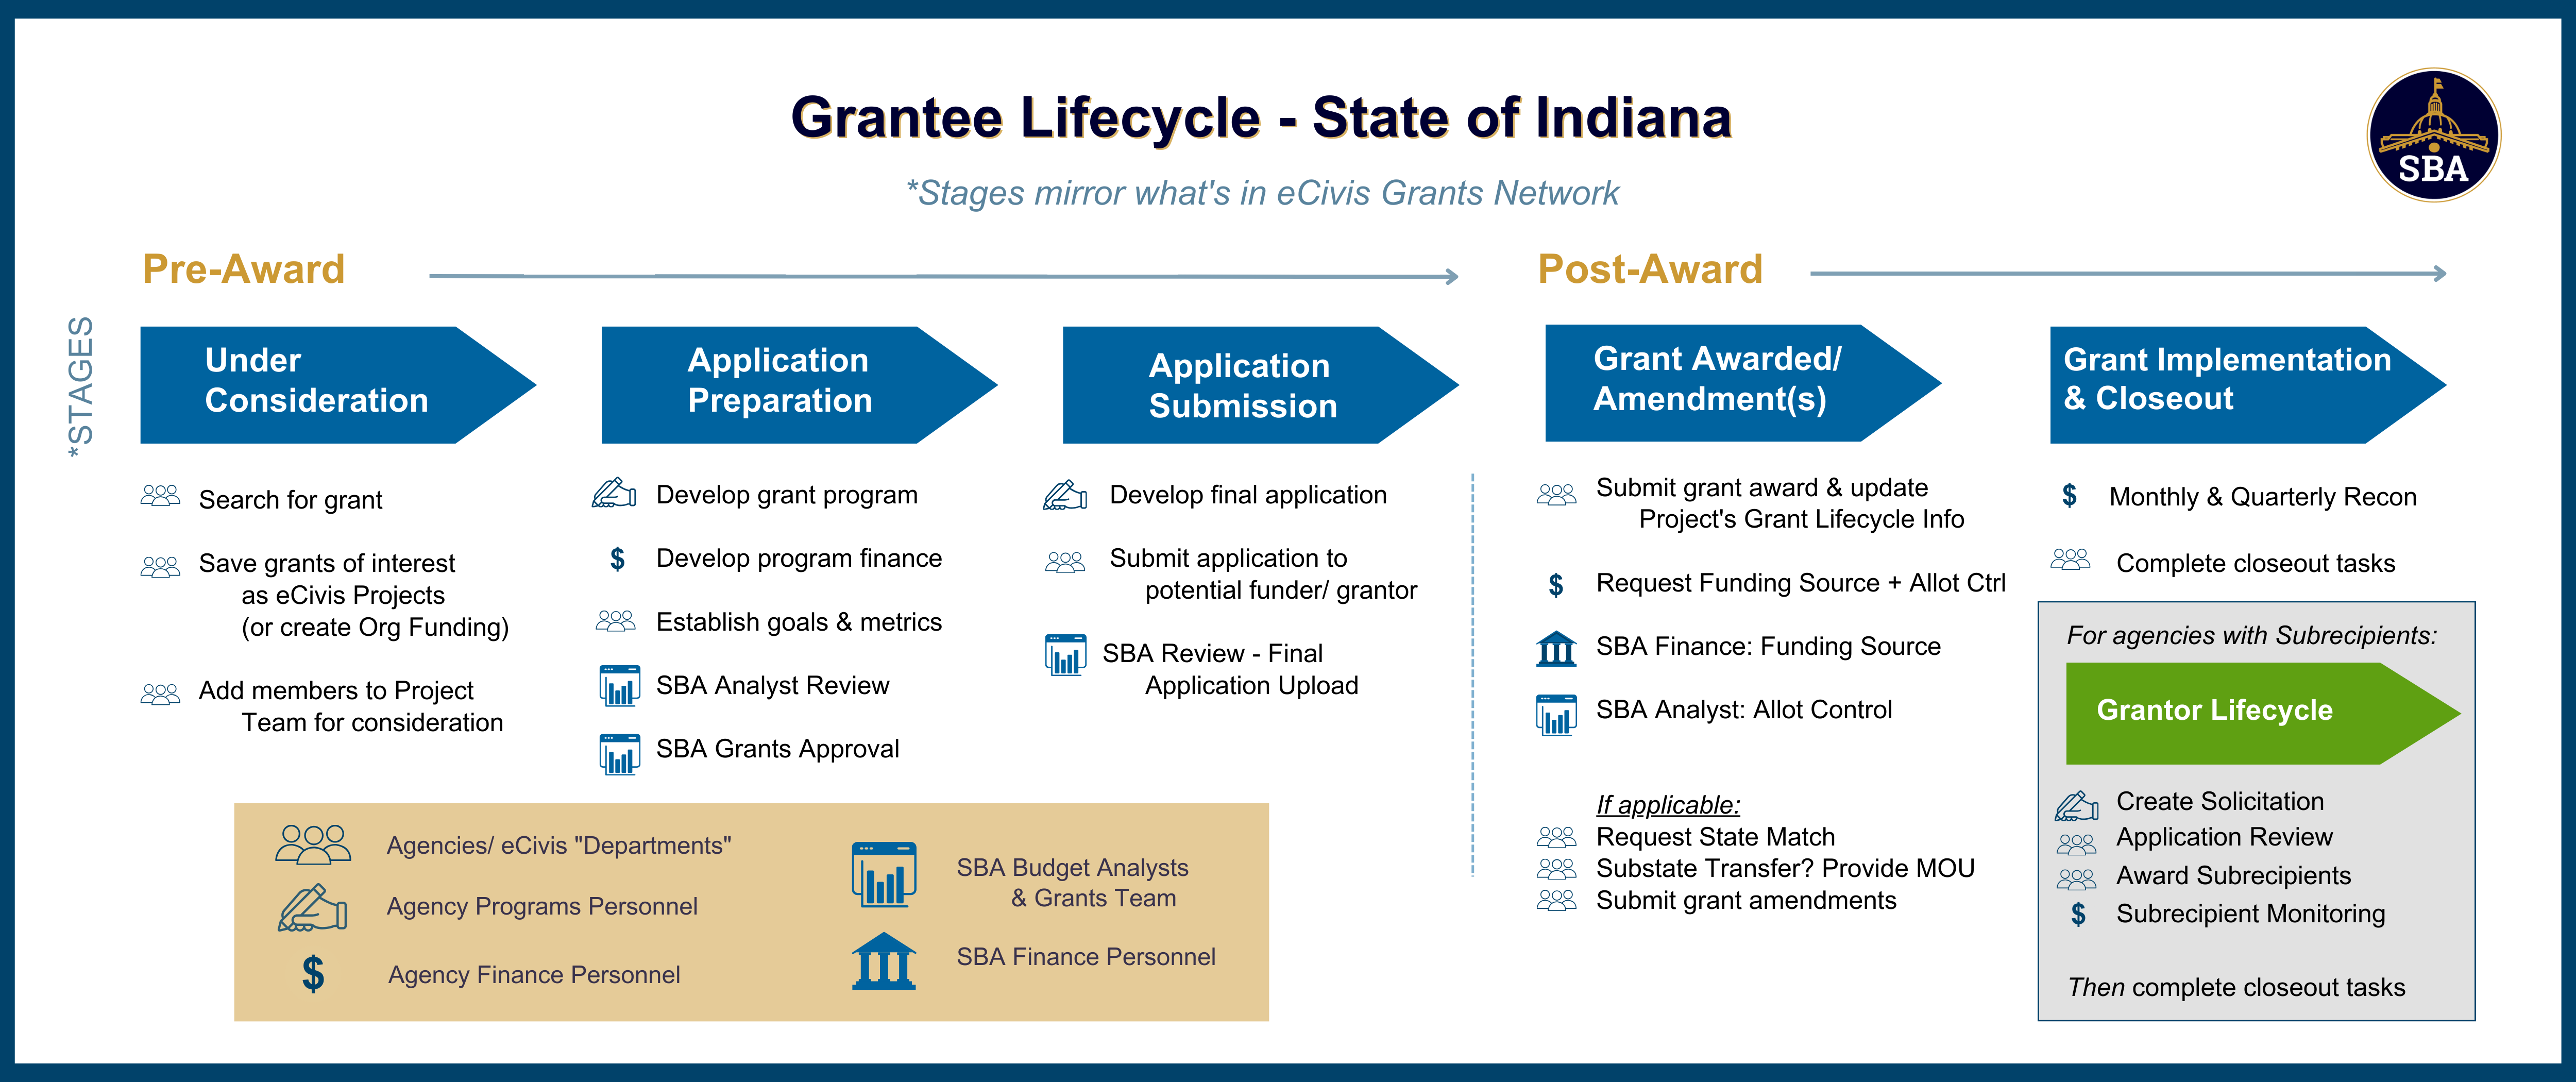 This graphic provides a visual overview of the grants lifecycle at the State of Indiana specific to when agencies serve as a Grantee. It denotes stages that mimic those of the eCivis Grants Network, which involve specific processes and roles for Indiana state agencies.   Before an agency is awarded a grant it is considered to be in Grantee Pre-Award, which includes Under Consideration, Application Preparation, and Application Submission. Once an agency has been notified of a grant award, it progresses into Grantee Post-Award, which includes Grant Awarded, Implementation, and Closeout eCivis stages. 